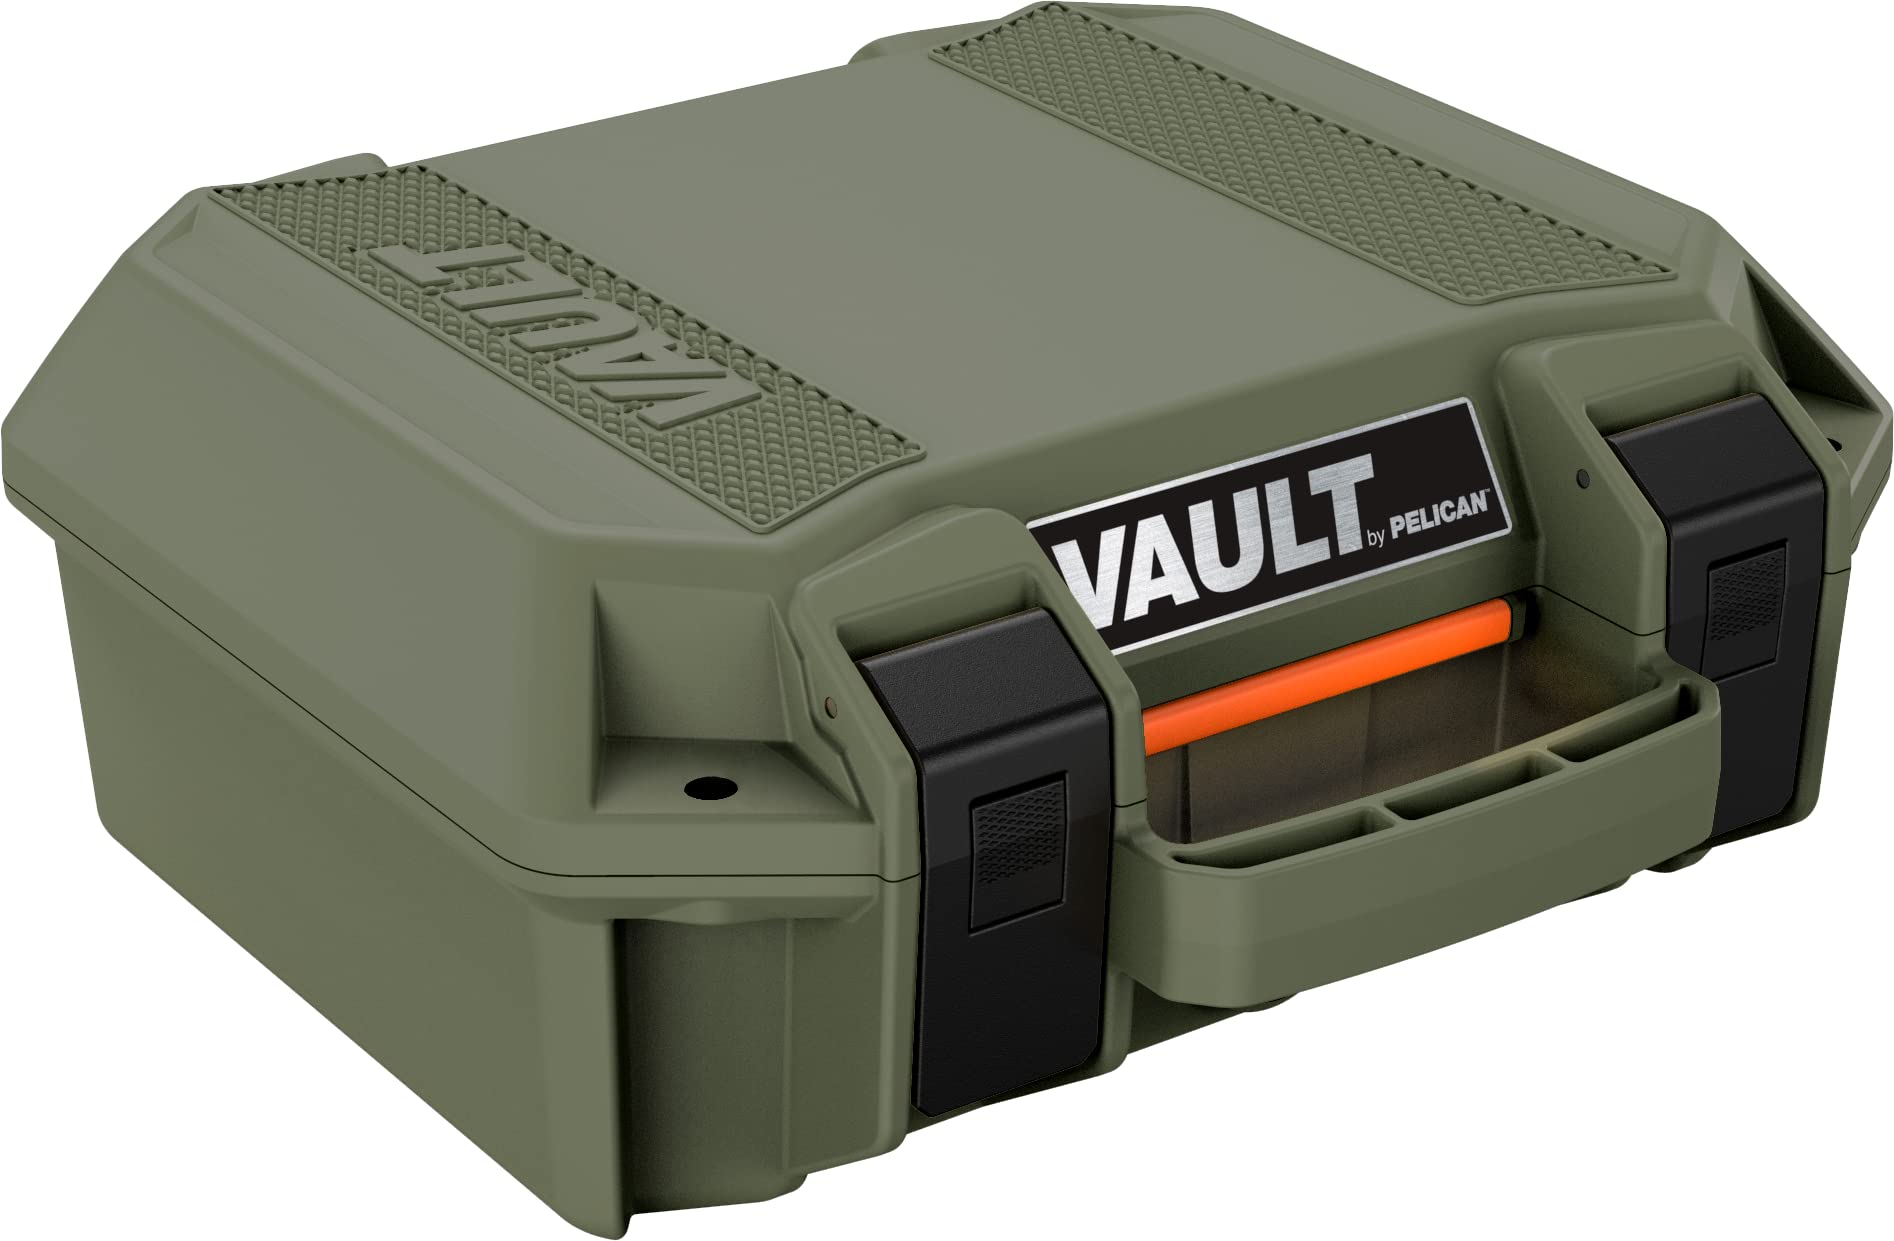 Vault by Pelican - V100 Multi-Purpose Hard Case with Foam for Camera, Drone, Equipment, Electronics, and Gear (OD Green)